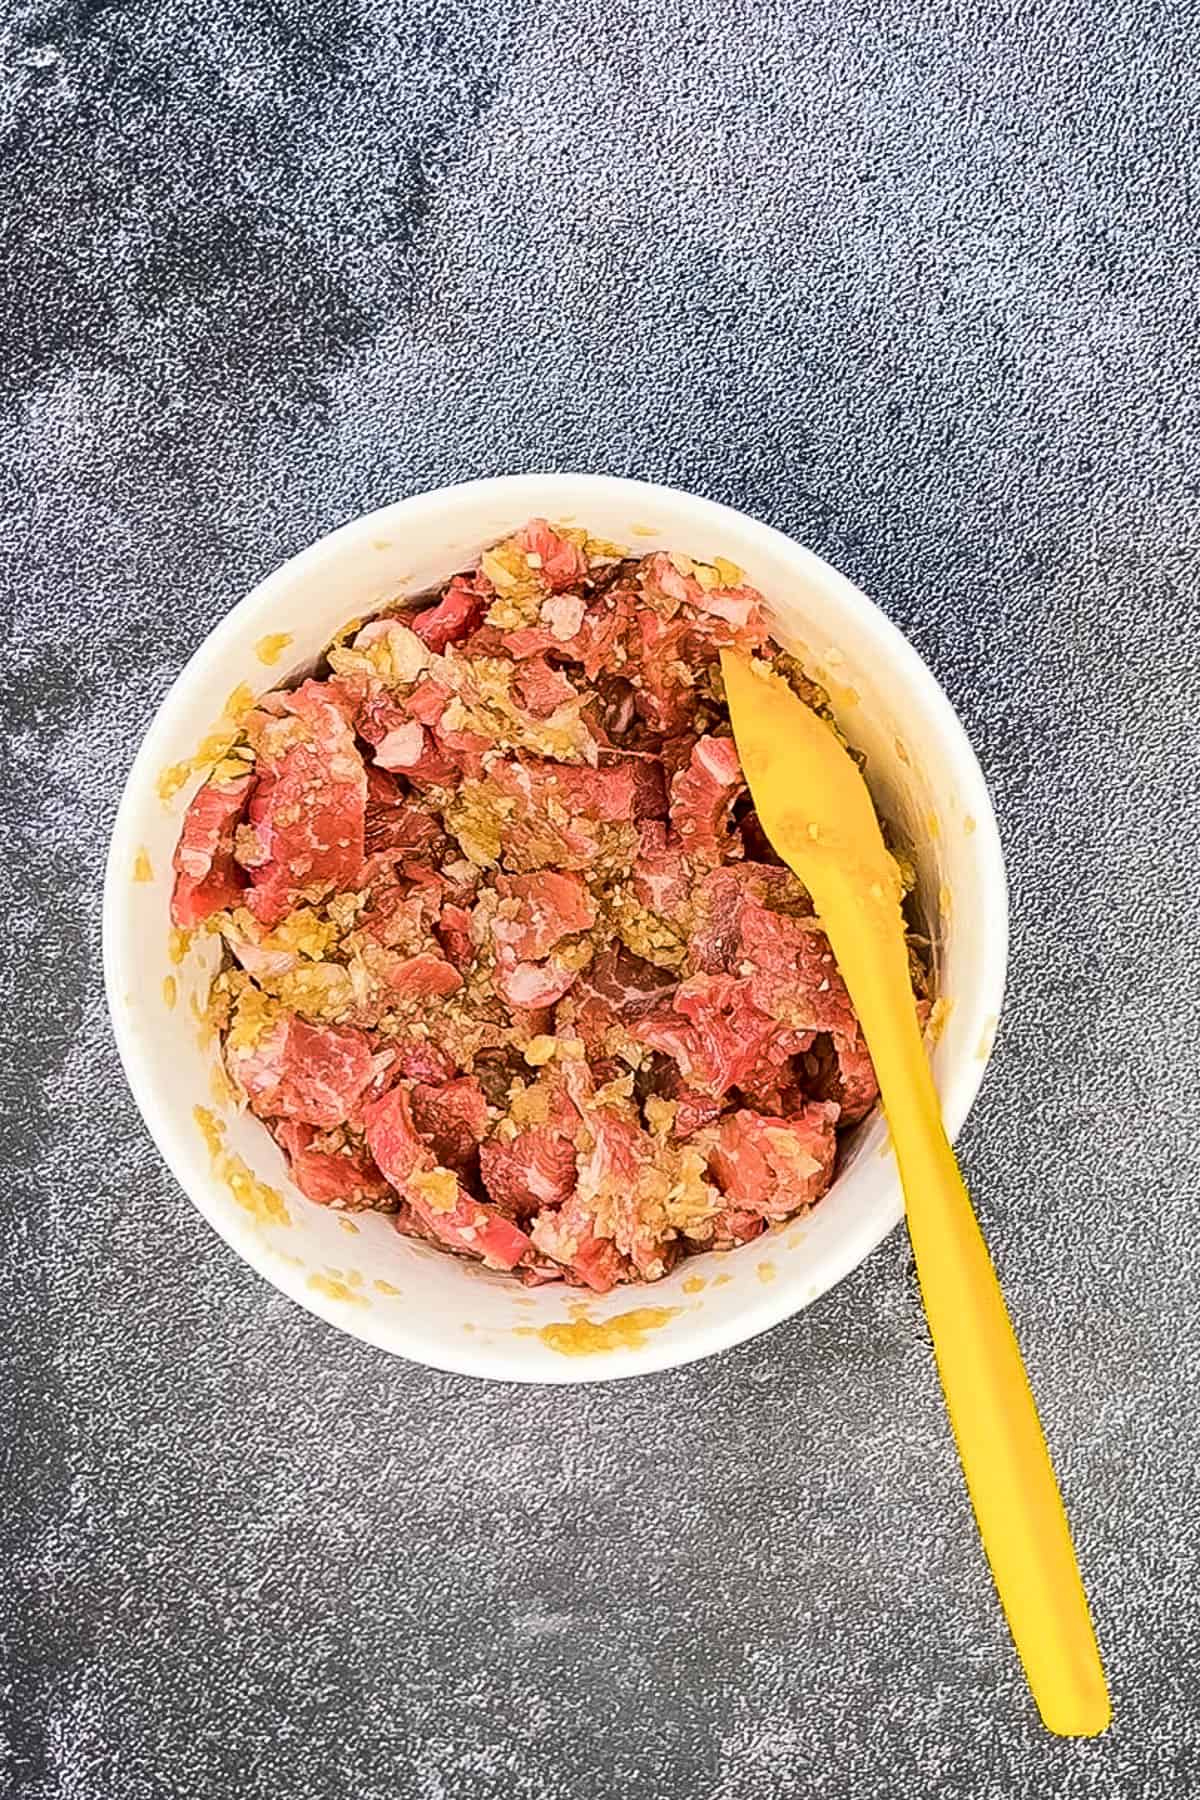 Crispy chilli beef served in a bowl with a yellow spoon.